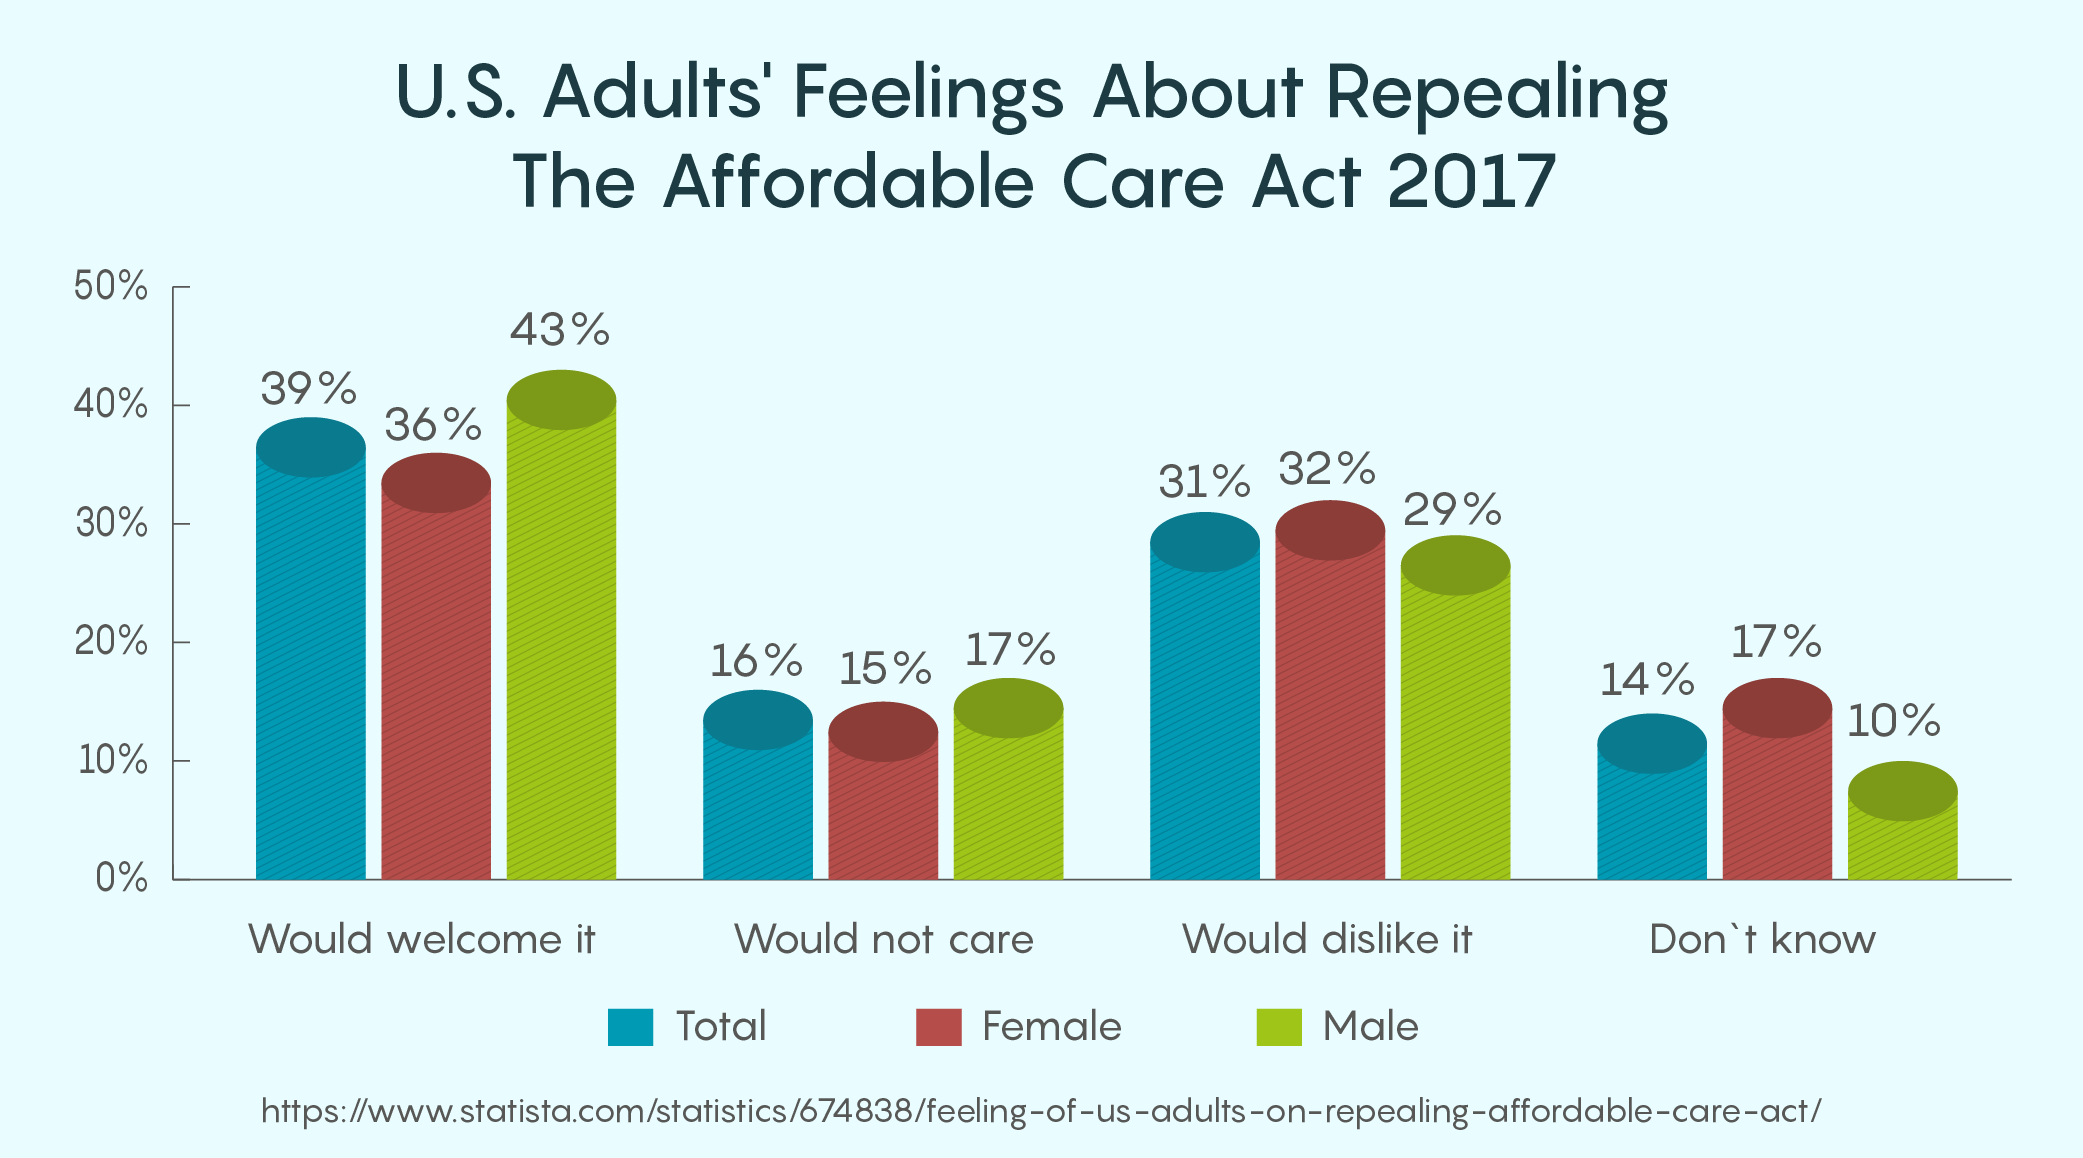 U.S. Adults' Feelings About Repealing The Affordable Care Act 2017